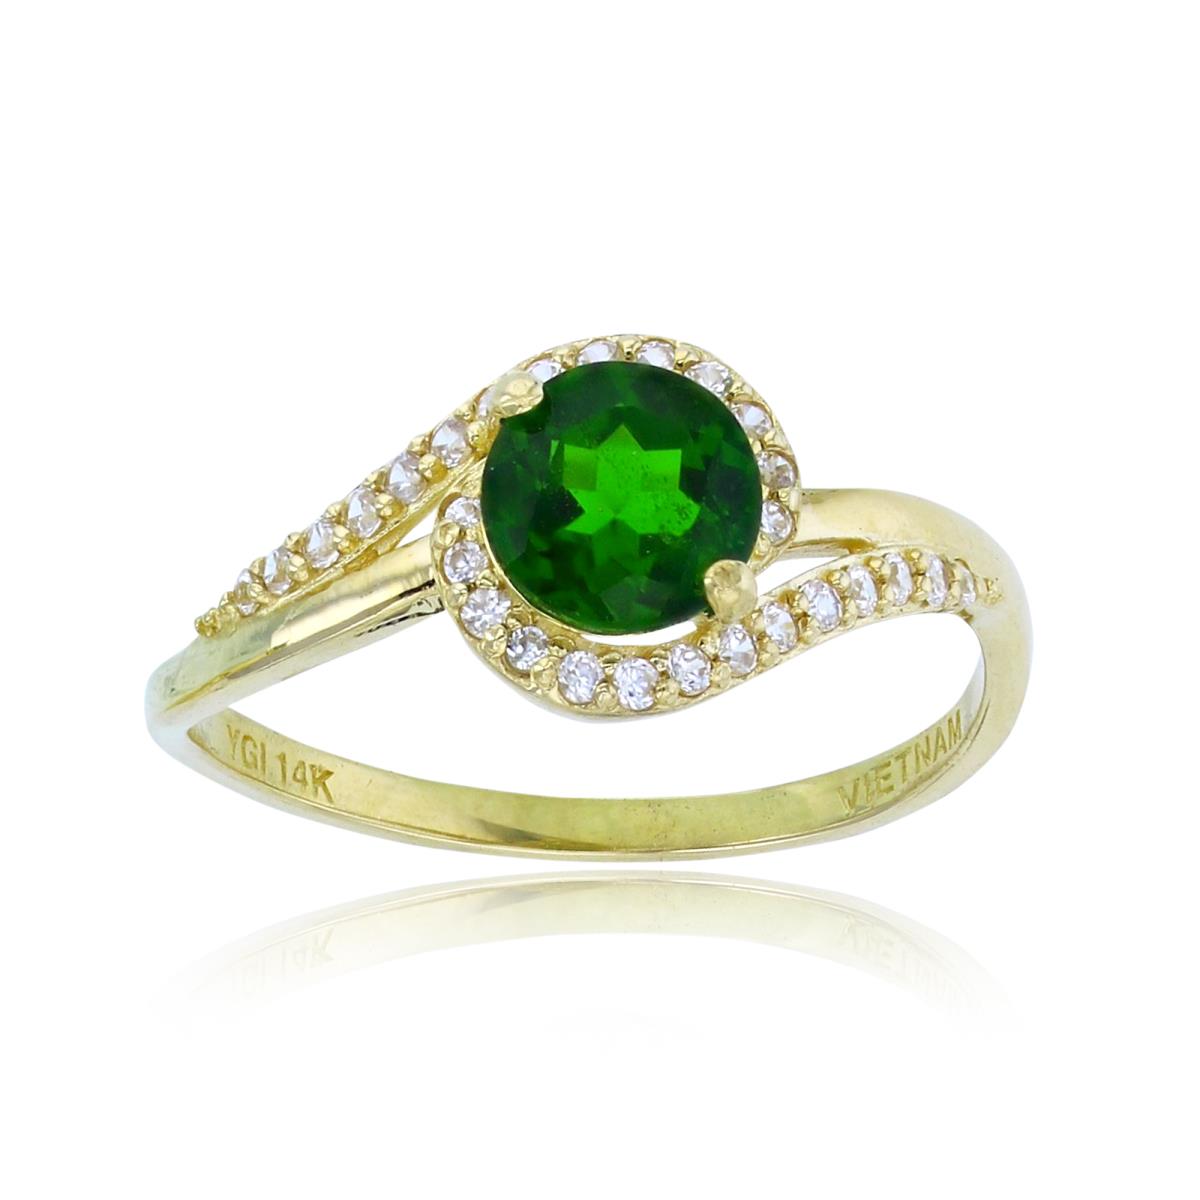 10K Yellow Gold 6mm Rnd Chrome Diopside & Wh.Zircon Invert Engagement Ring